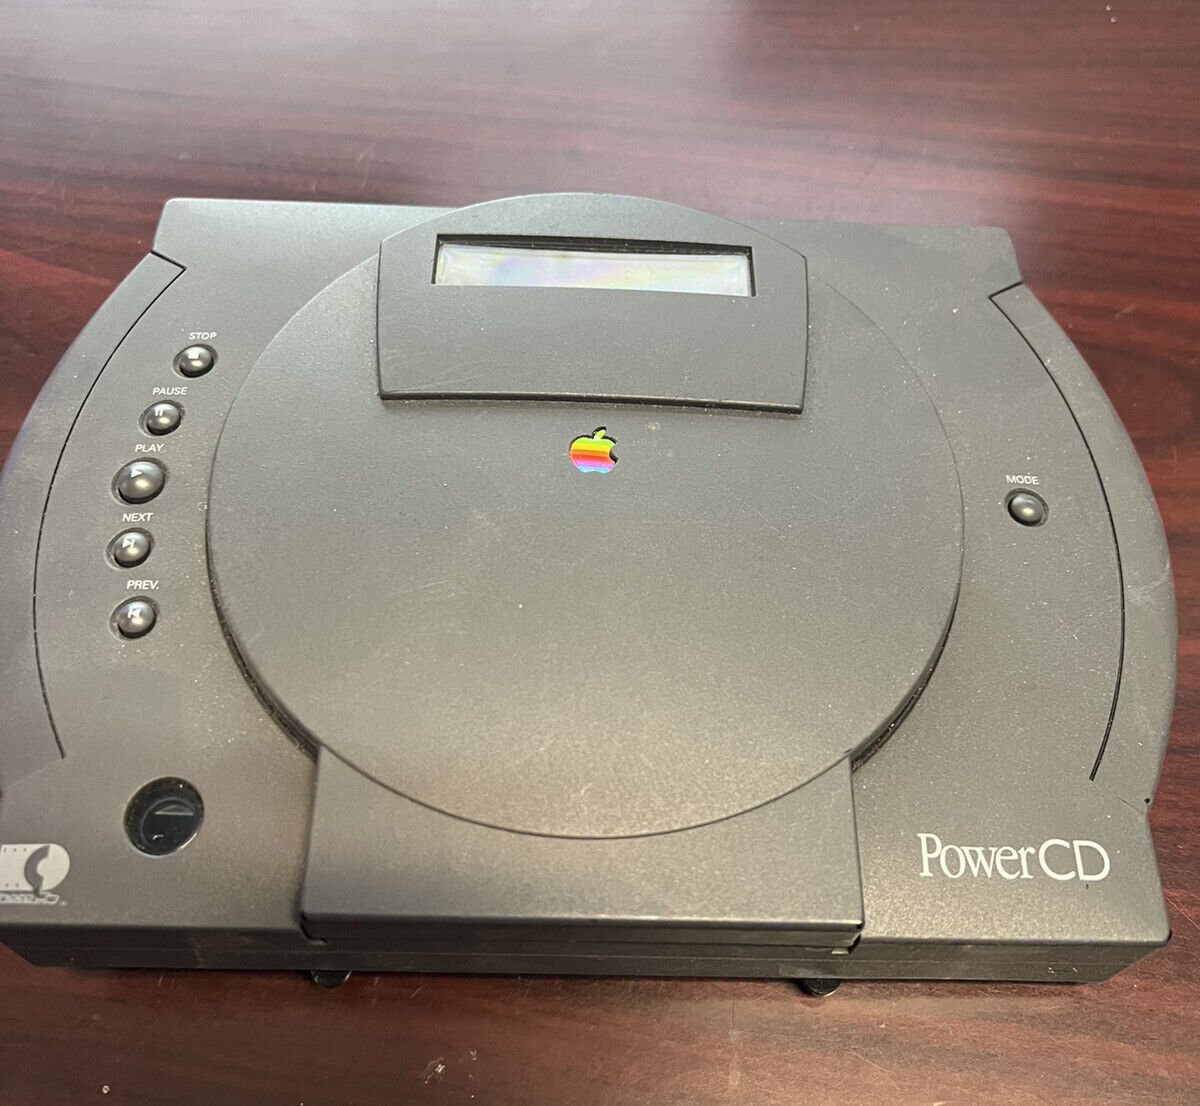 Vintage Apple PowerCD (1993 SCSI) ~sold as is~ for parts not tested~